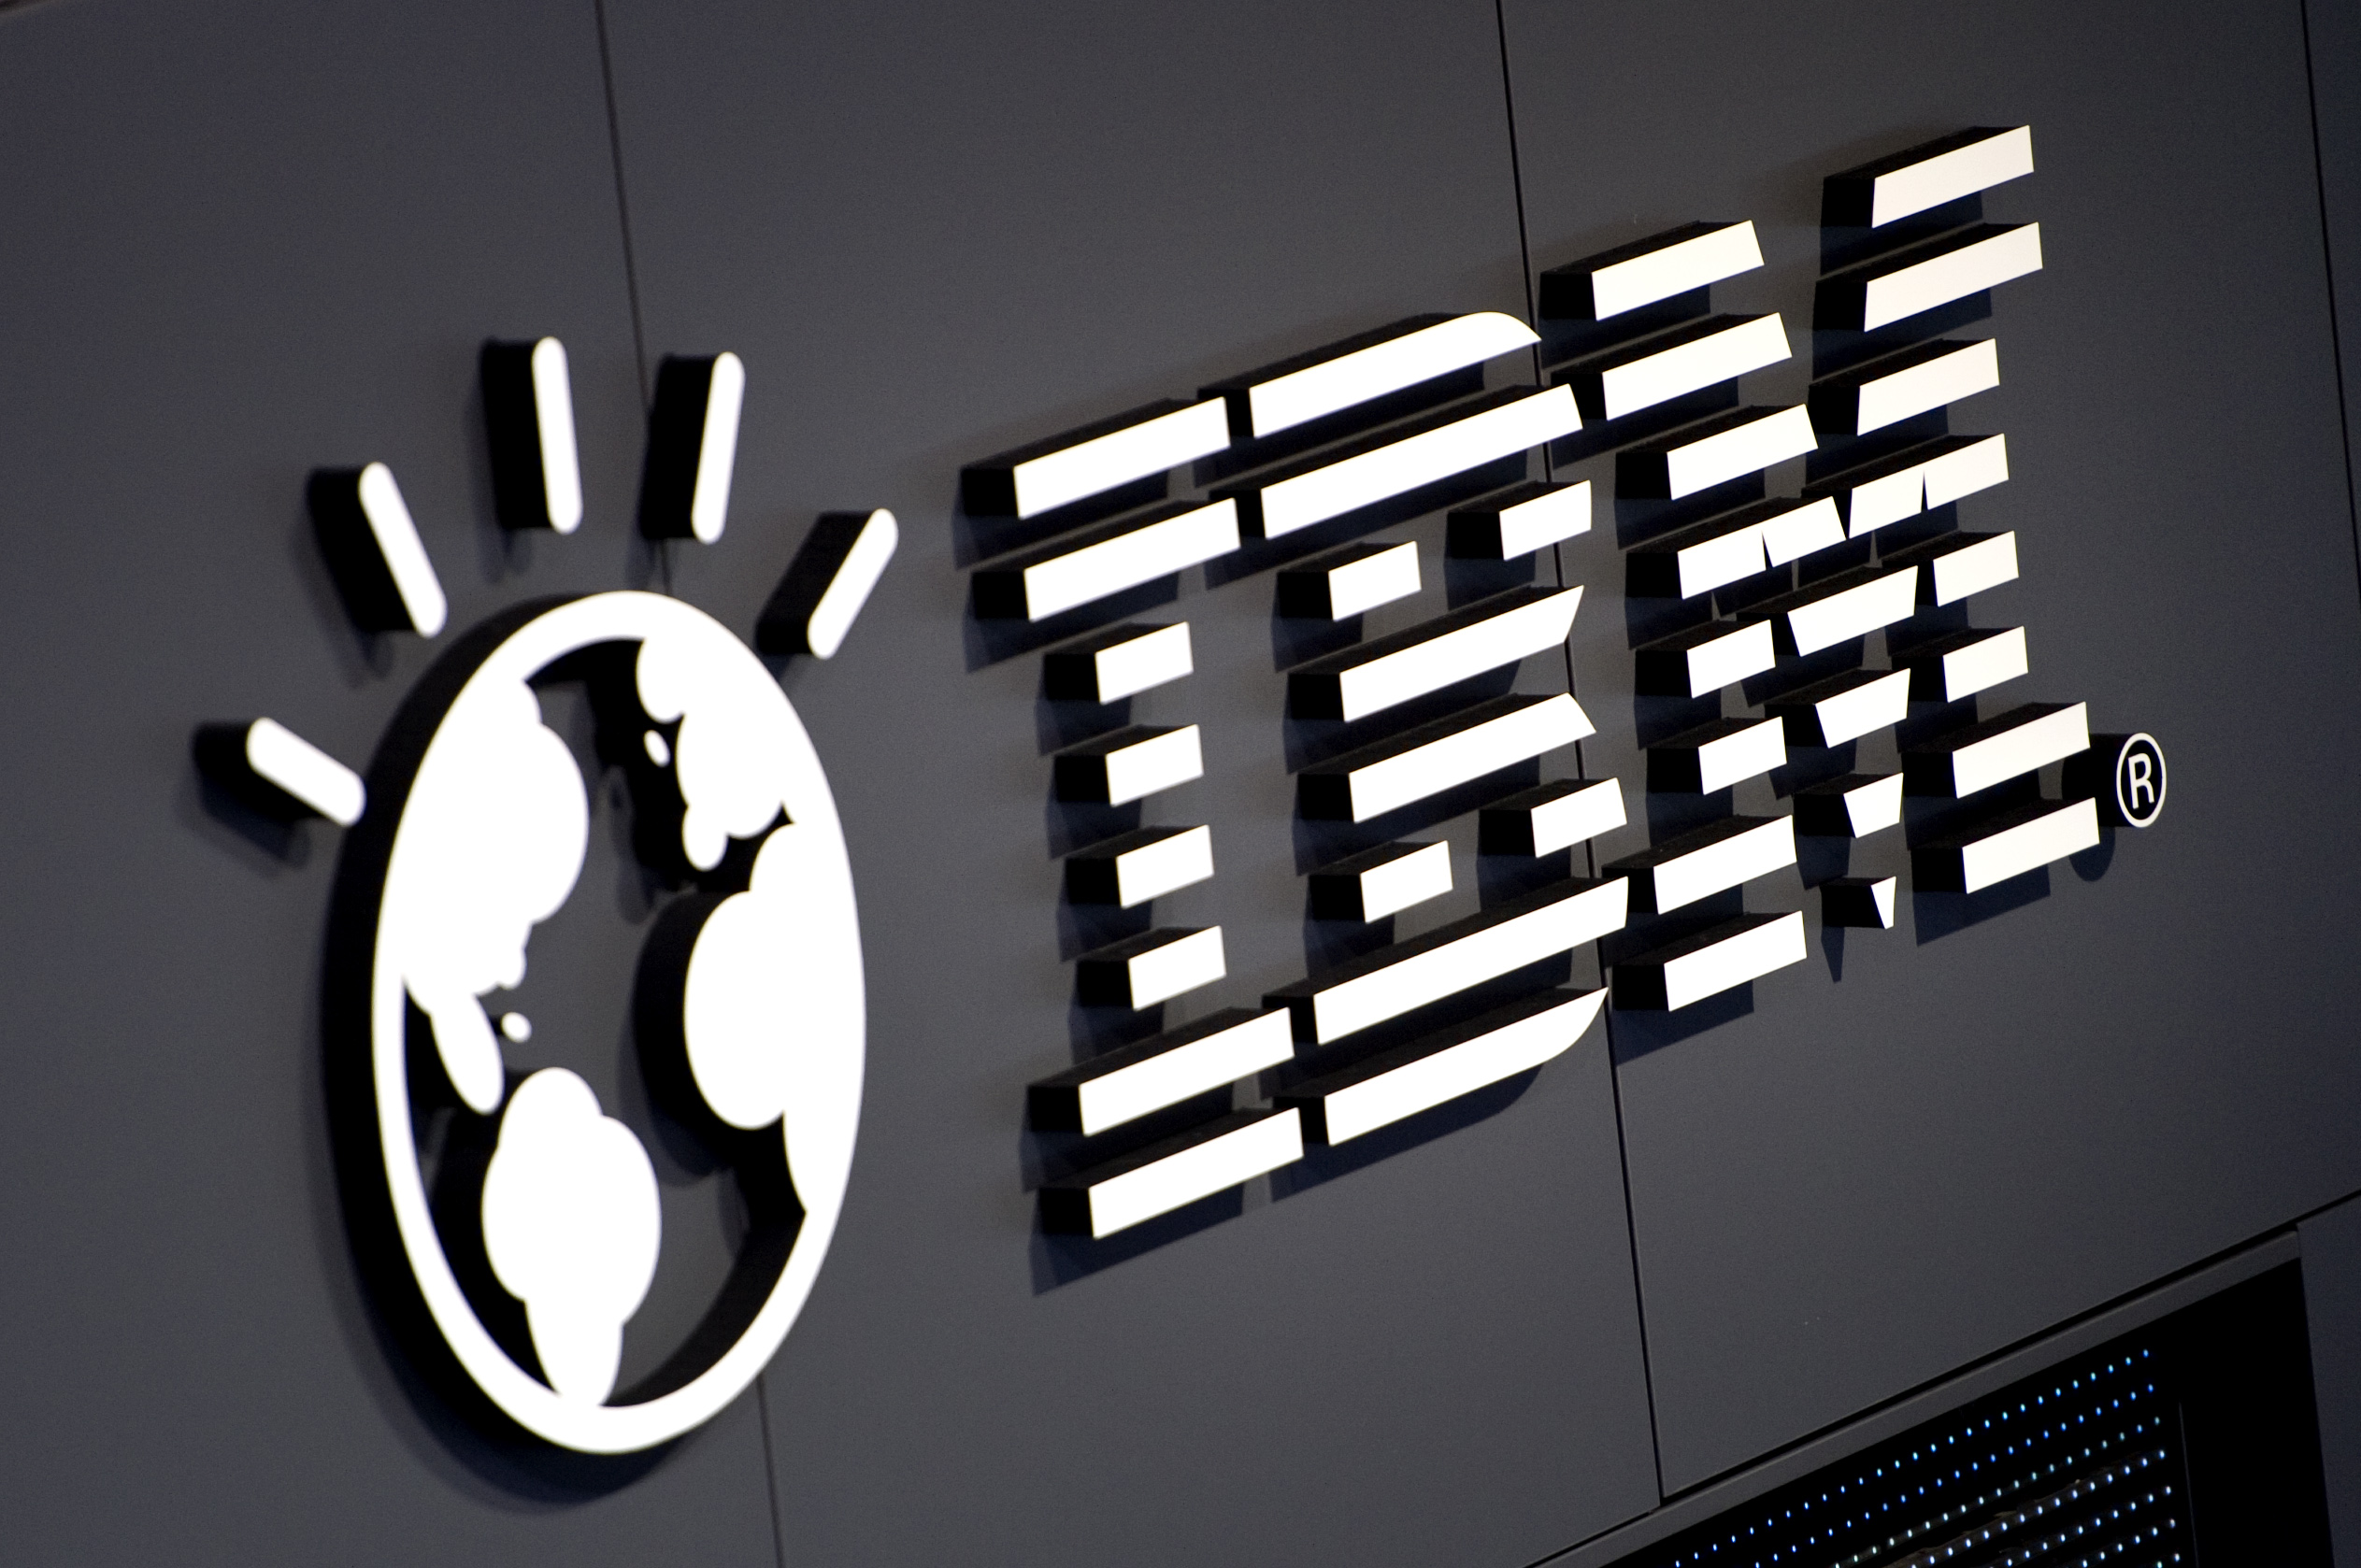 The logo of IBM is seen at their booth prior to the opening of the CeBIT IT fair on March 5, 2012 in Hanover, central Germany. (Odd Anderson&mdash;AFP/Getty Images)